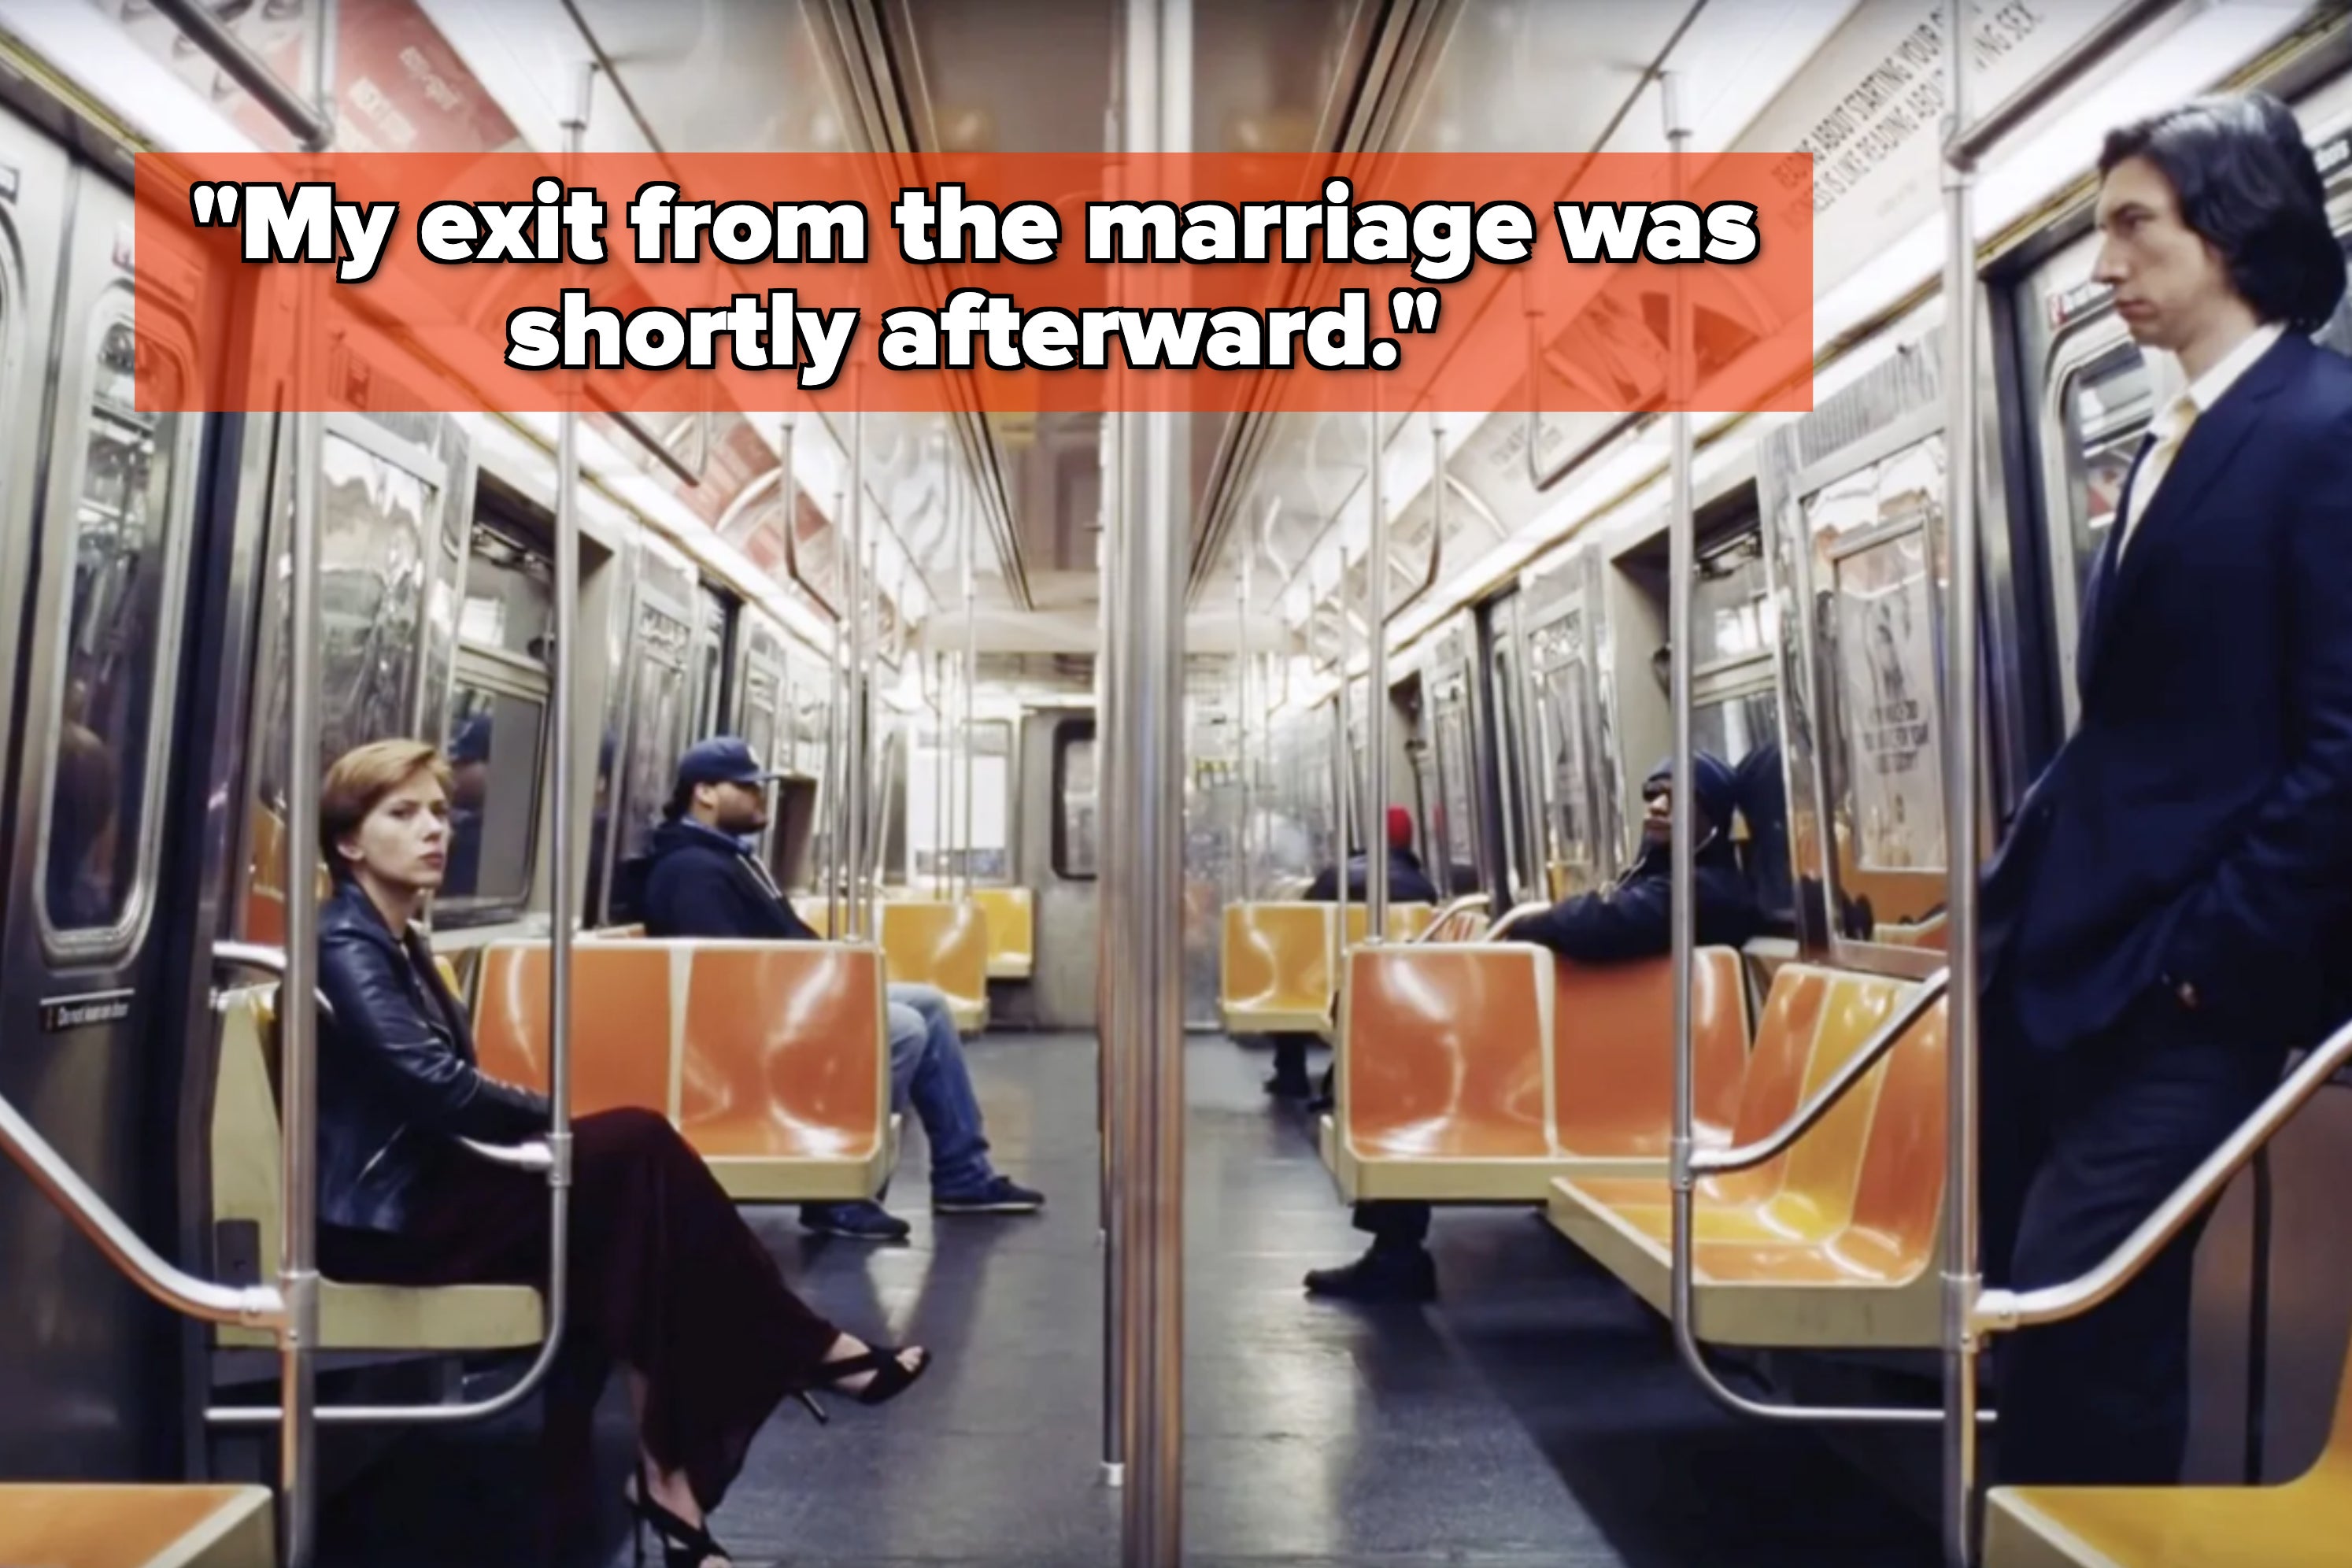 16 Divorced People Shared Their "Time To Go" Moment That Made Them Realize Their Marriage Was Over